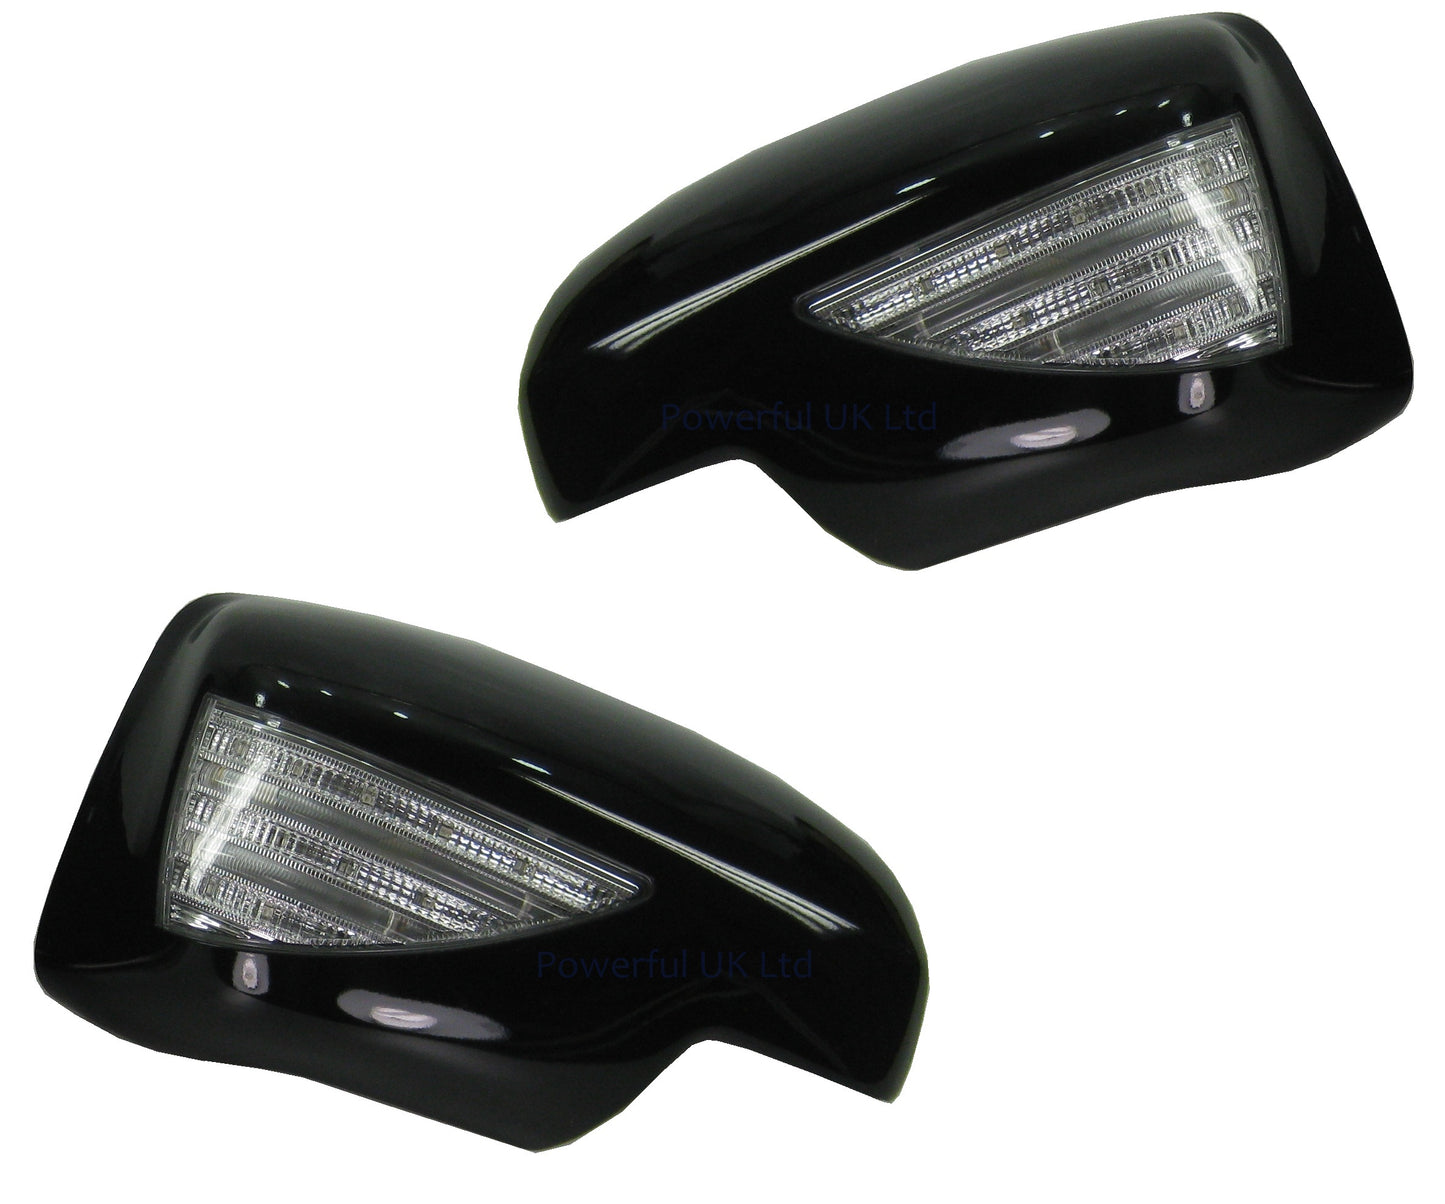 Full Mirror Covers With LED for Range Rover L322 (05-09 Mirrors) - Gloss Black